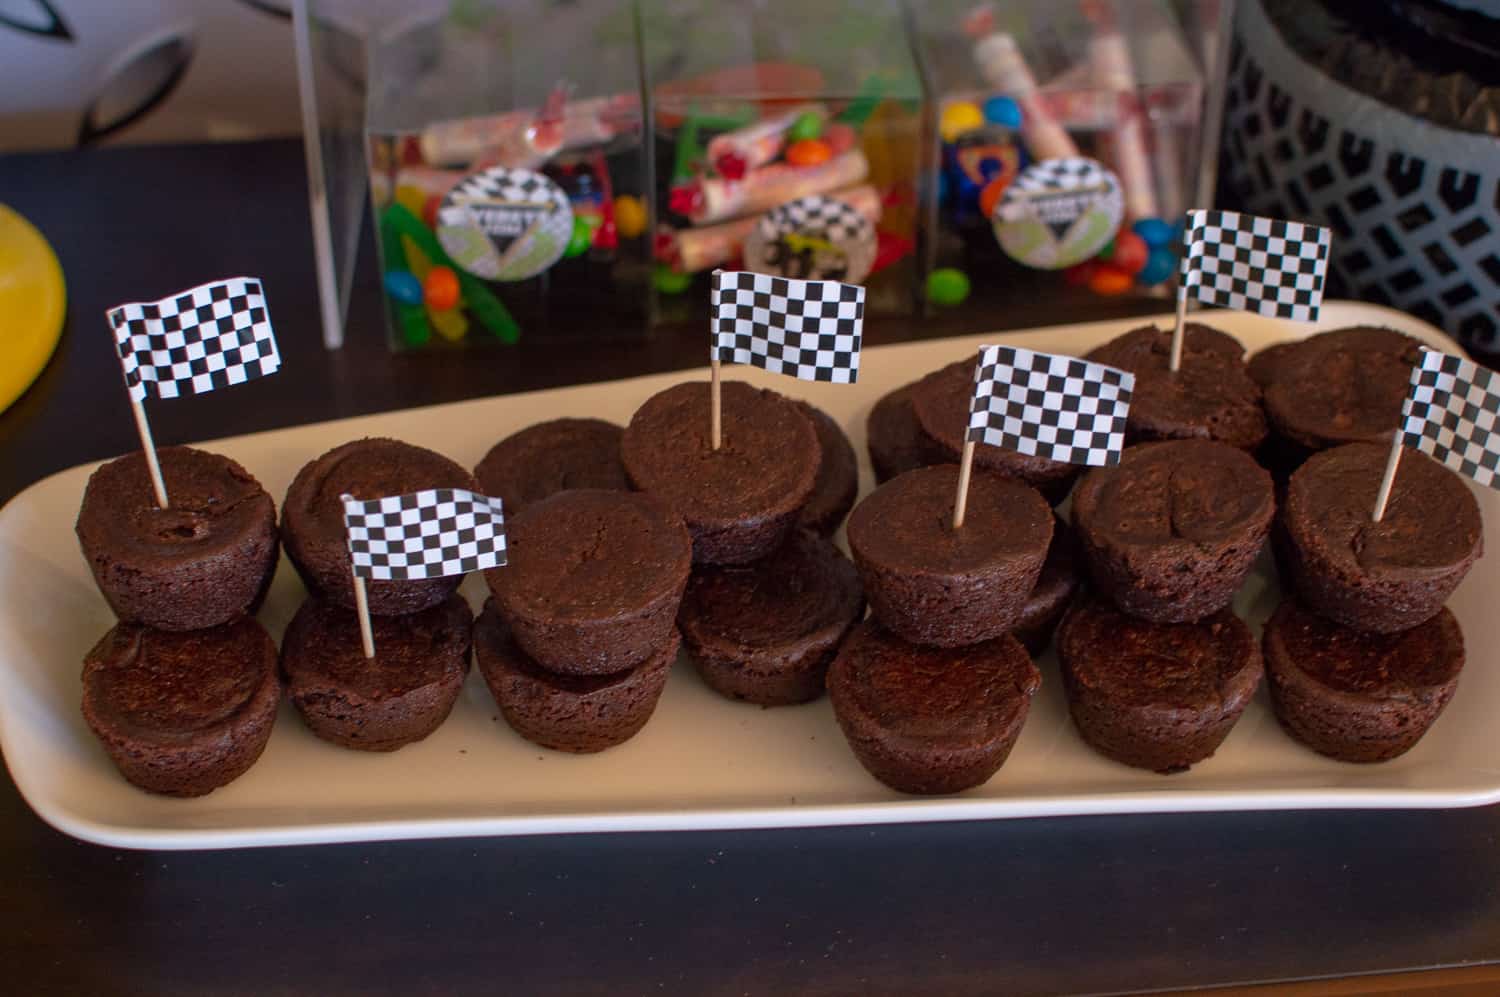 Mini Brownies become "spare tires"